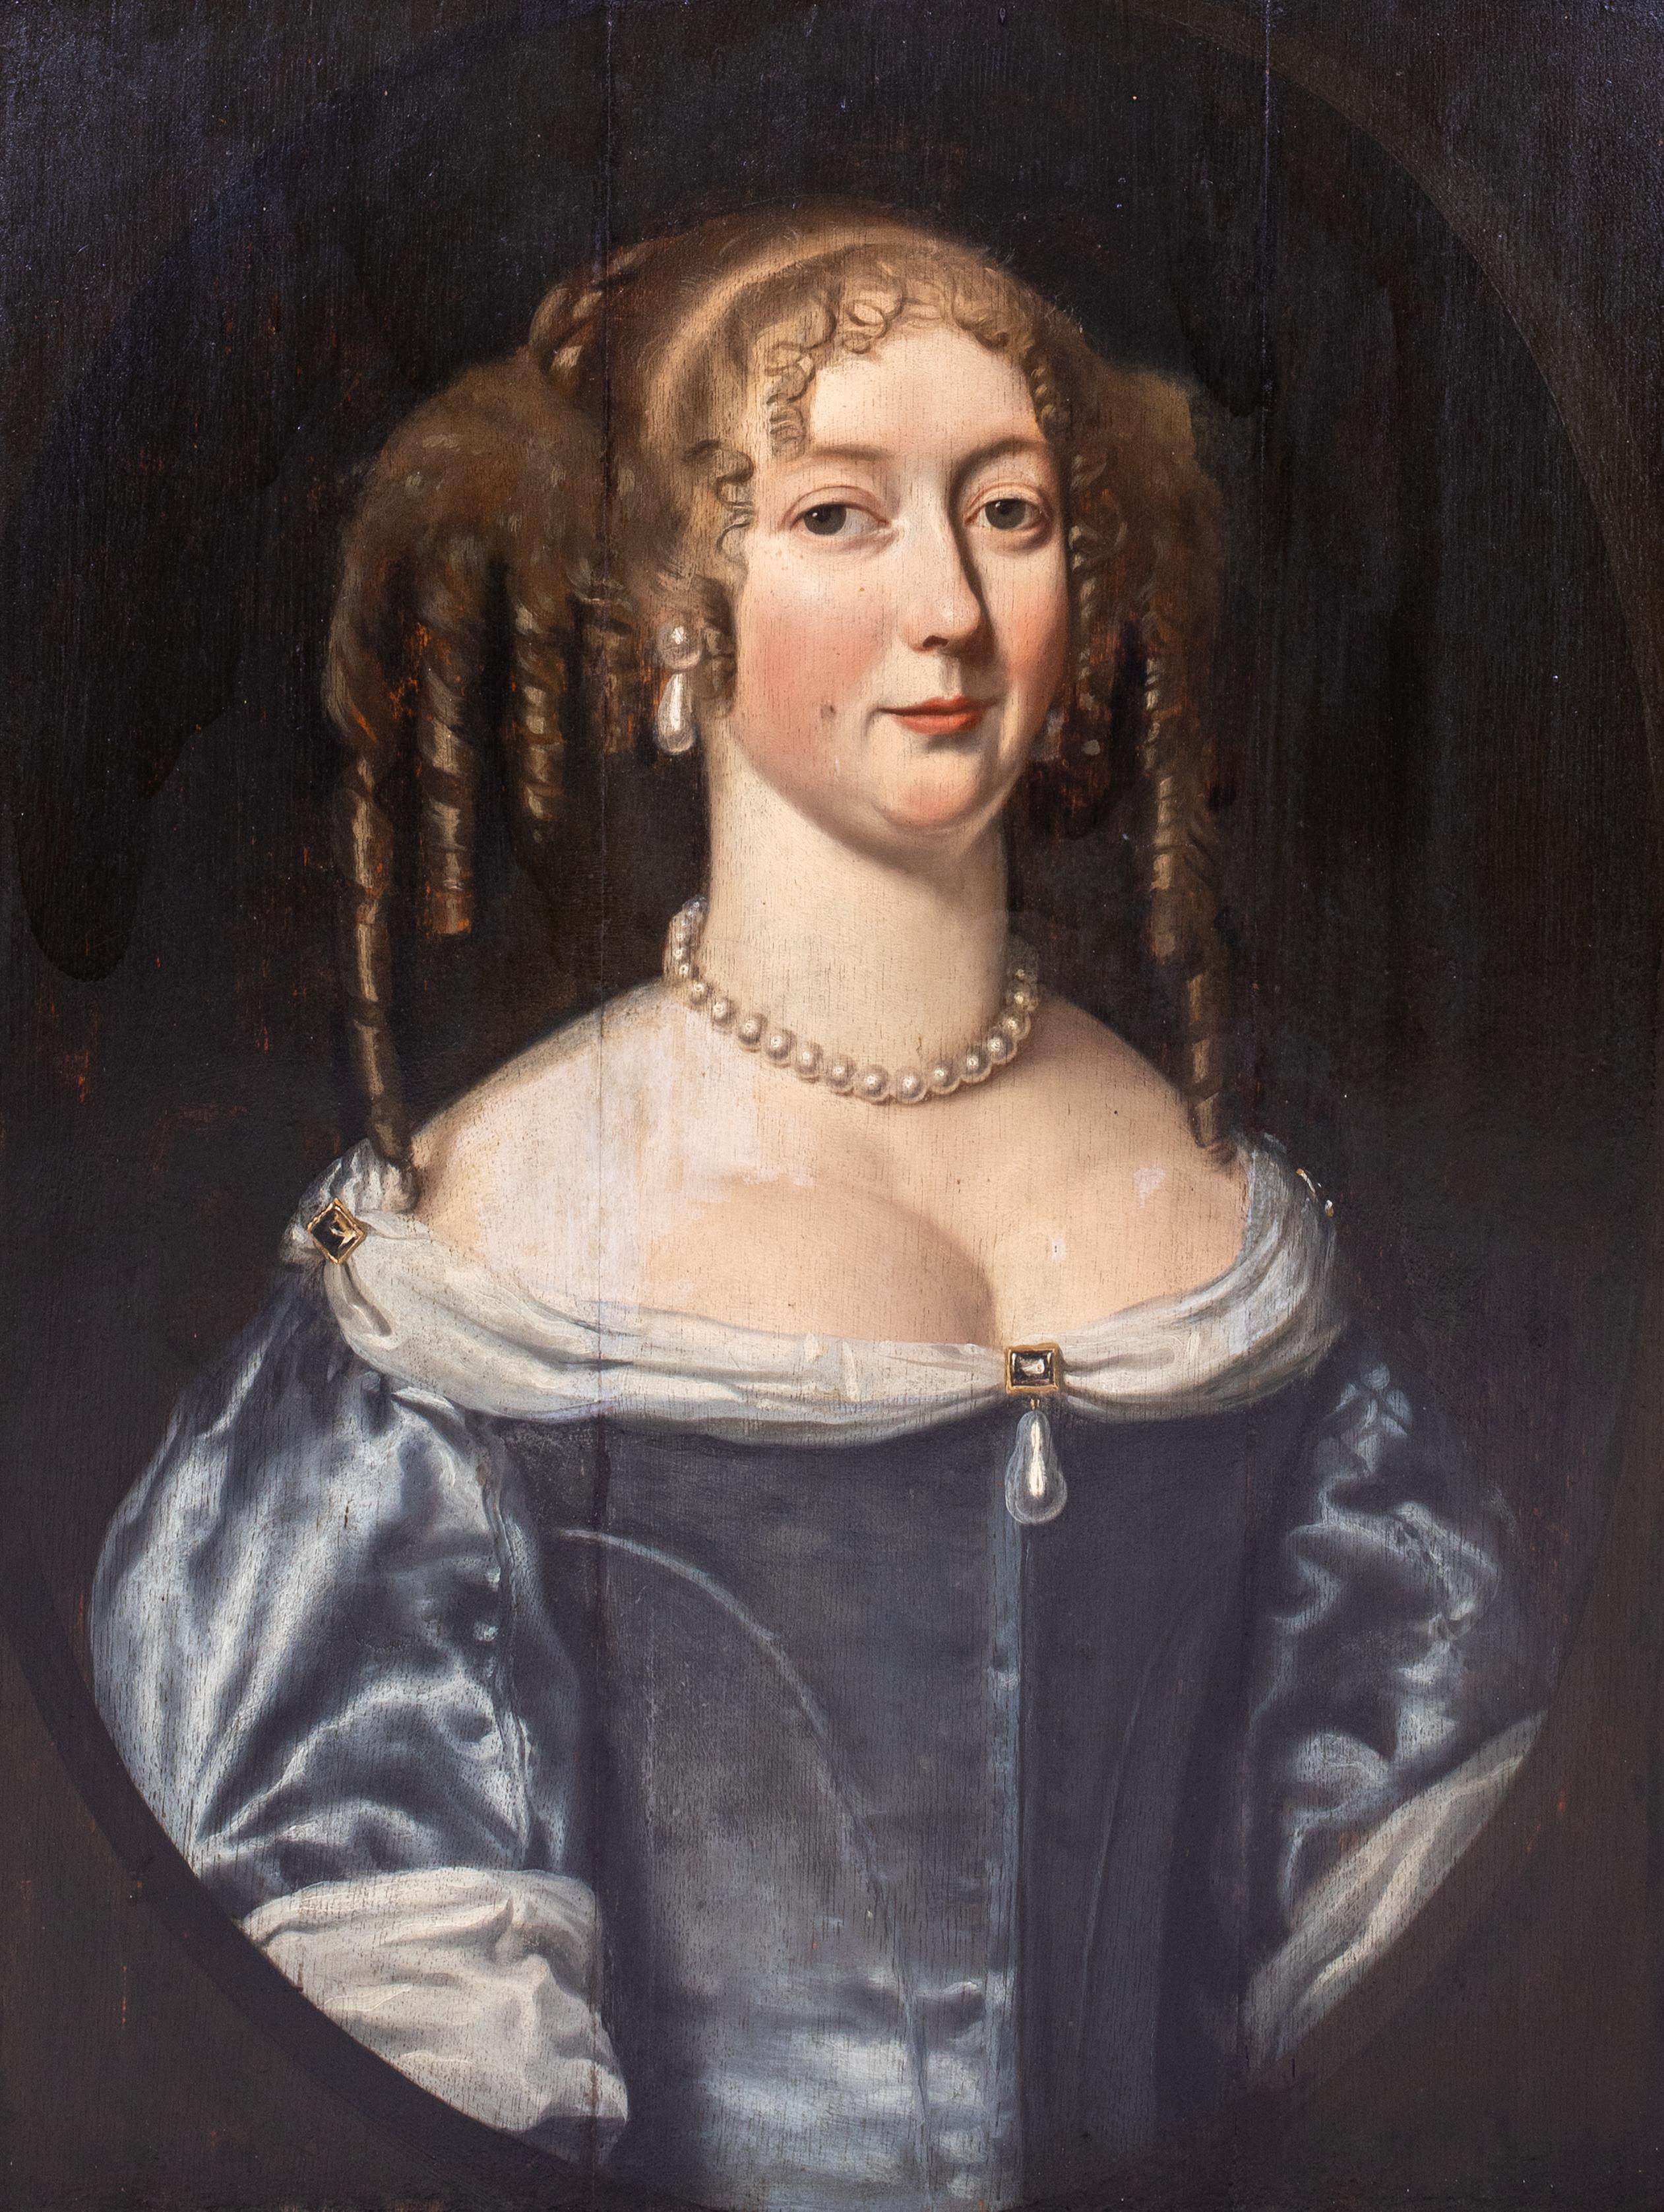 Portrait Of Elizabeth Percy, Countess of Northumberland (1646-1690), 17th Century 

Studio of Jan MYTENS (1640-1670)

Large 17th portrait of Elizabeth Percy Countess of Northumberland, oil on panel. Excellent quality and condition portrait of the